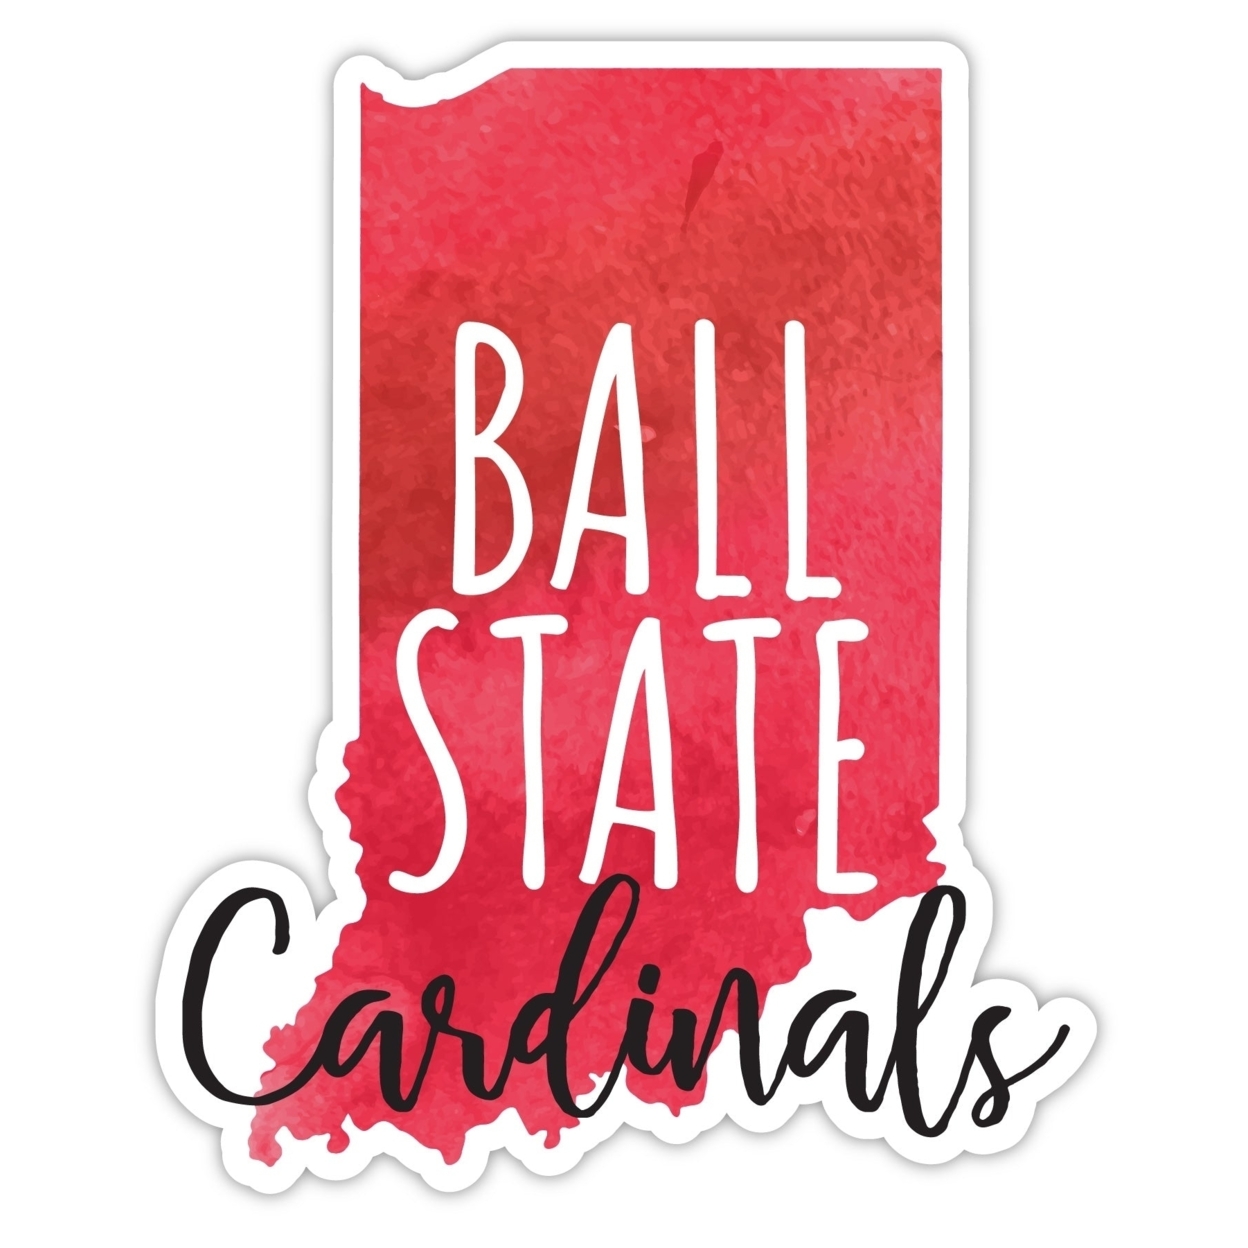 Ball State University Watercolor State Die Cut Decal 2-Inch